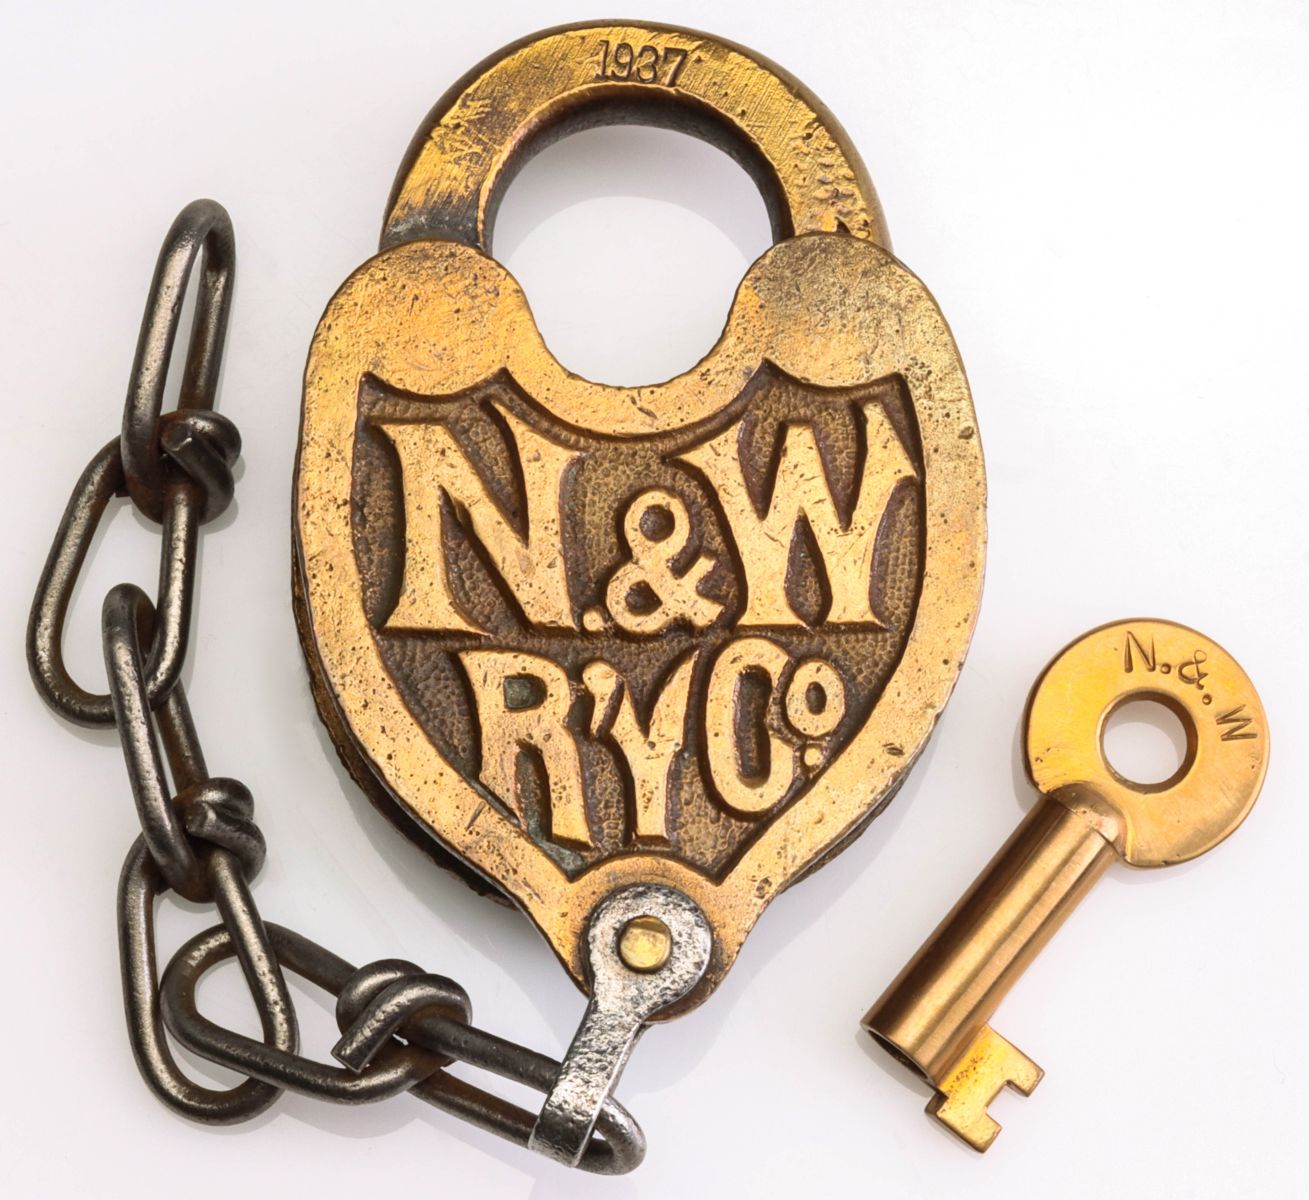 A NORFOLK AND WESTERN CAST BACK PADLOCK WITH KEY